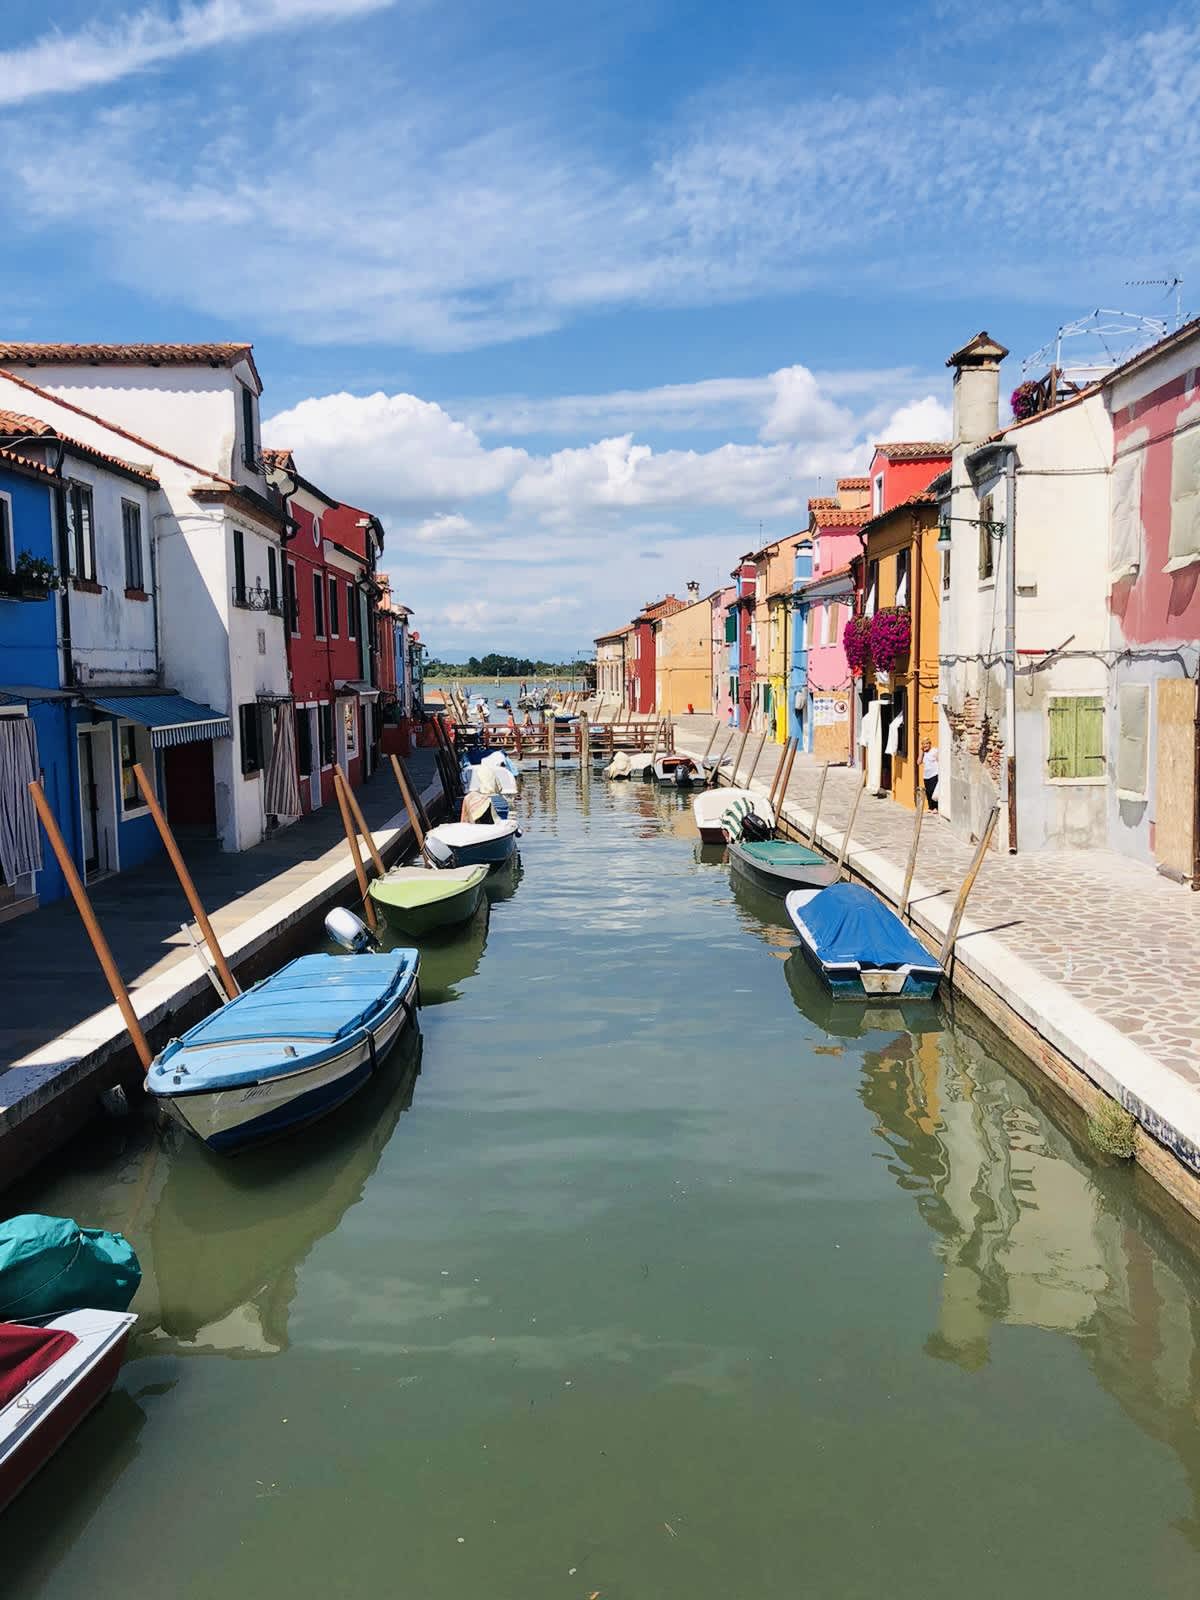 Colorful Burano, an island nearby Venice known for colorful houses